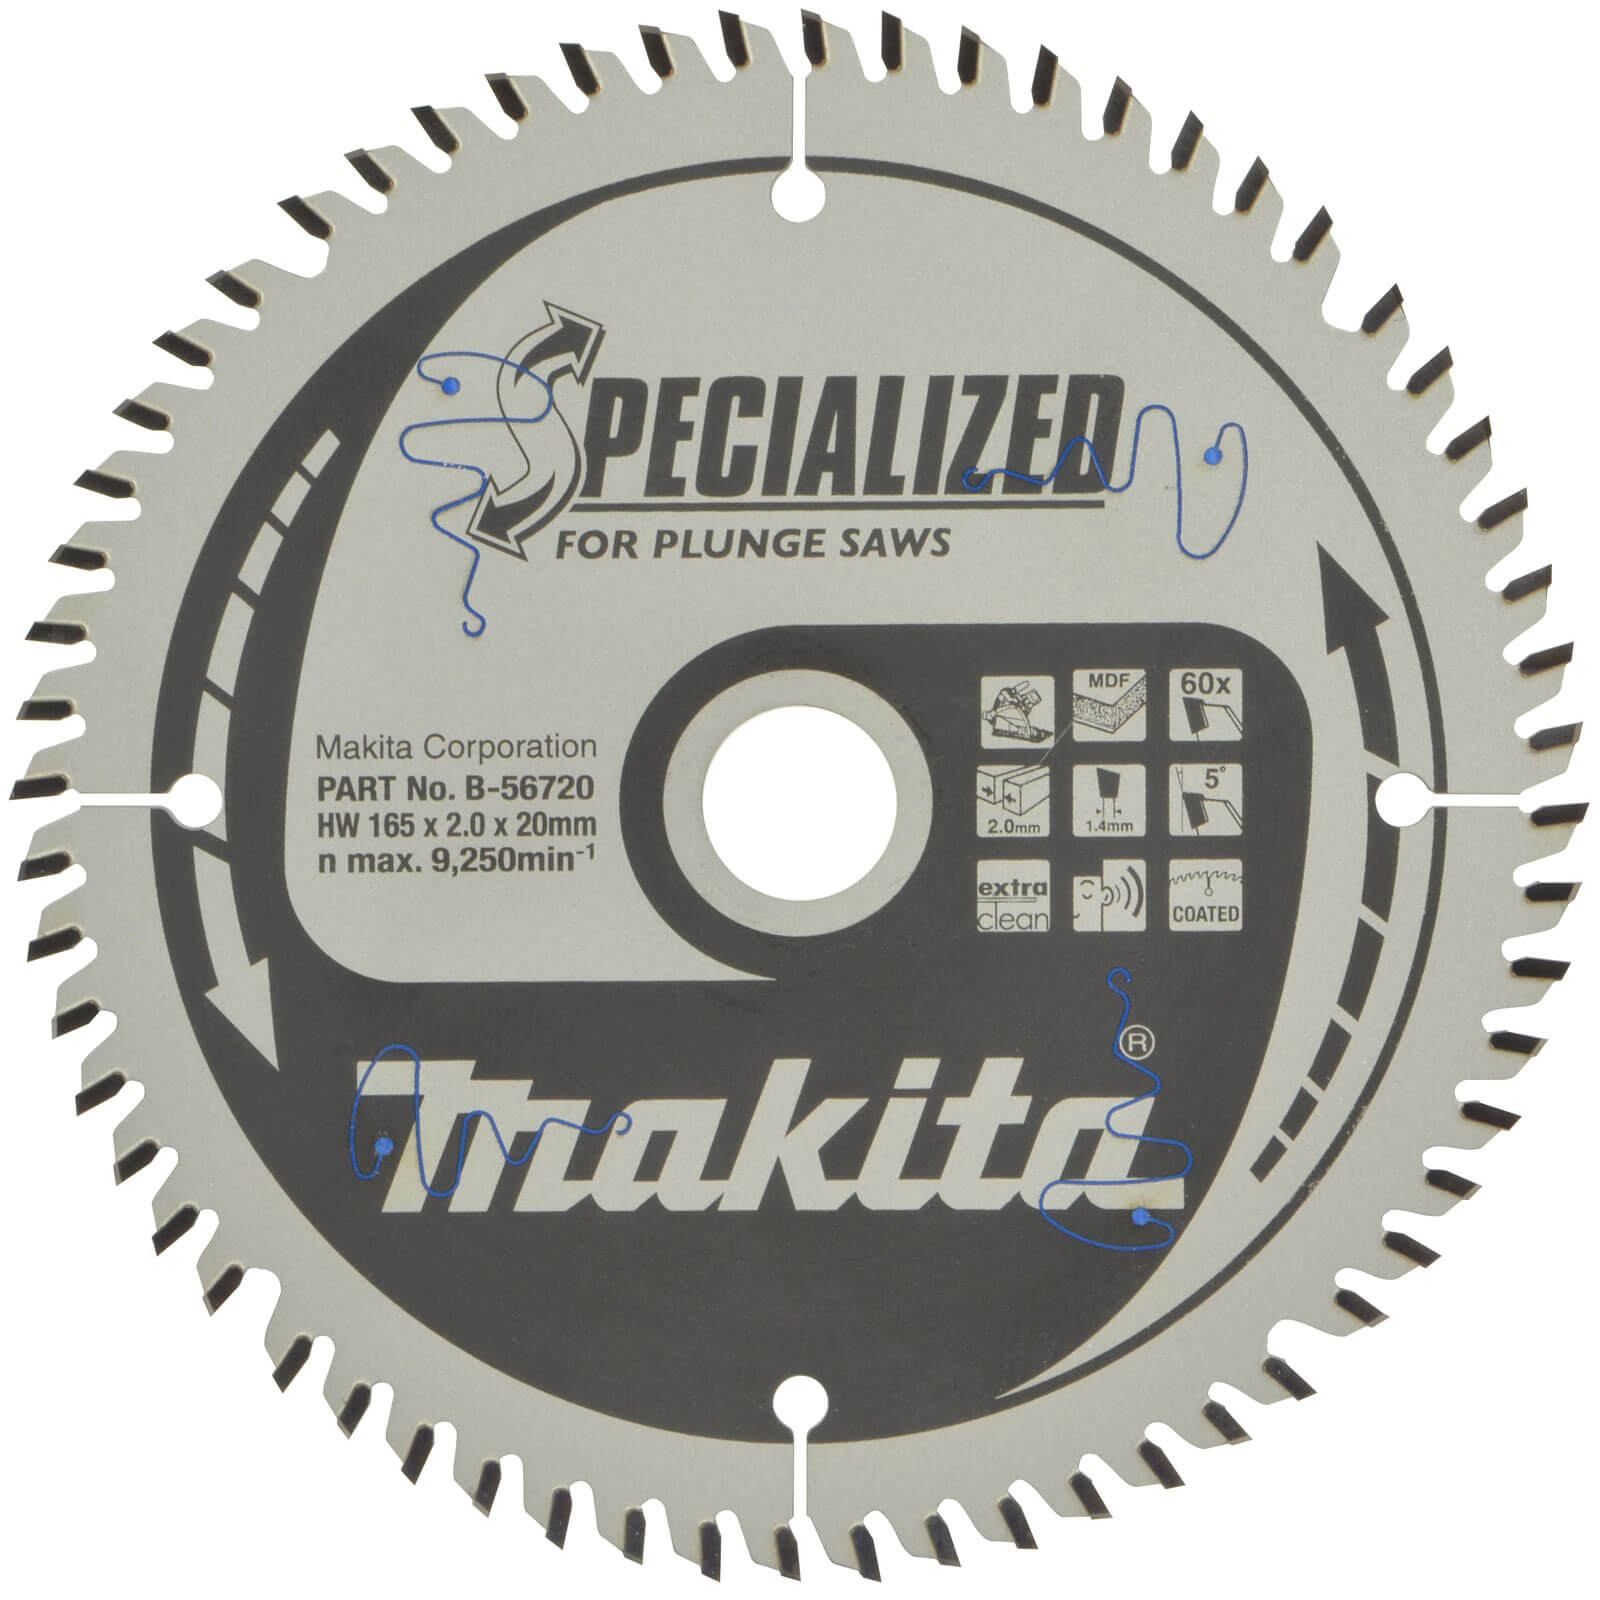 Makita SPECIALIZED Plunge Saw MDF and Laminate Saw Blade 165mm 60T 20mm